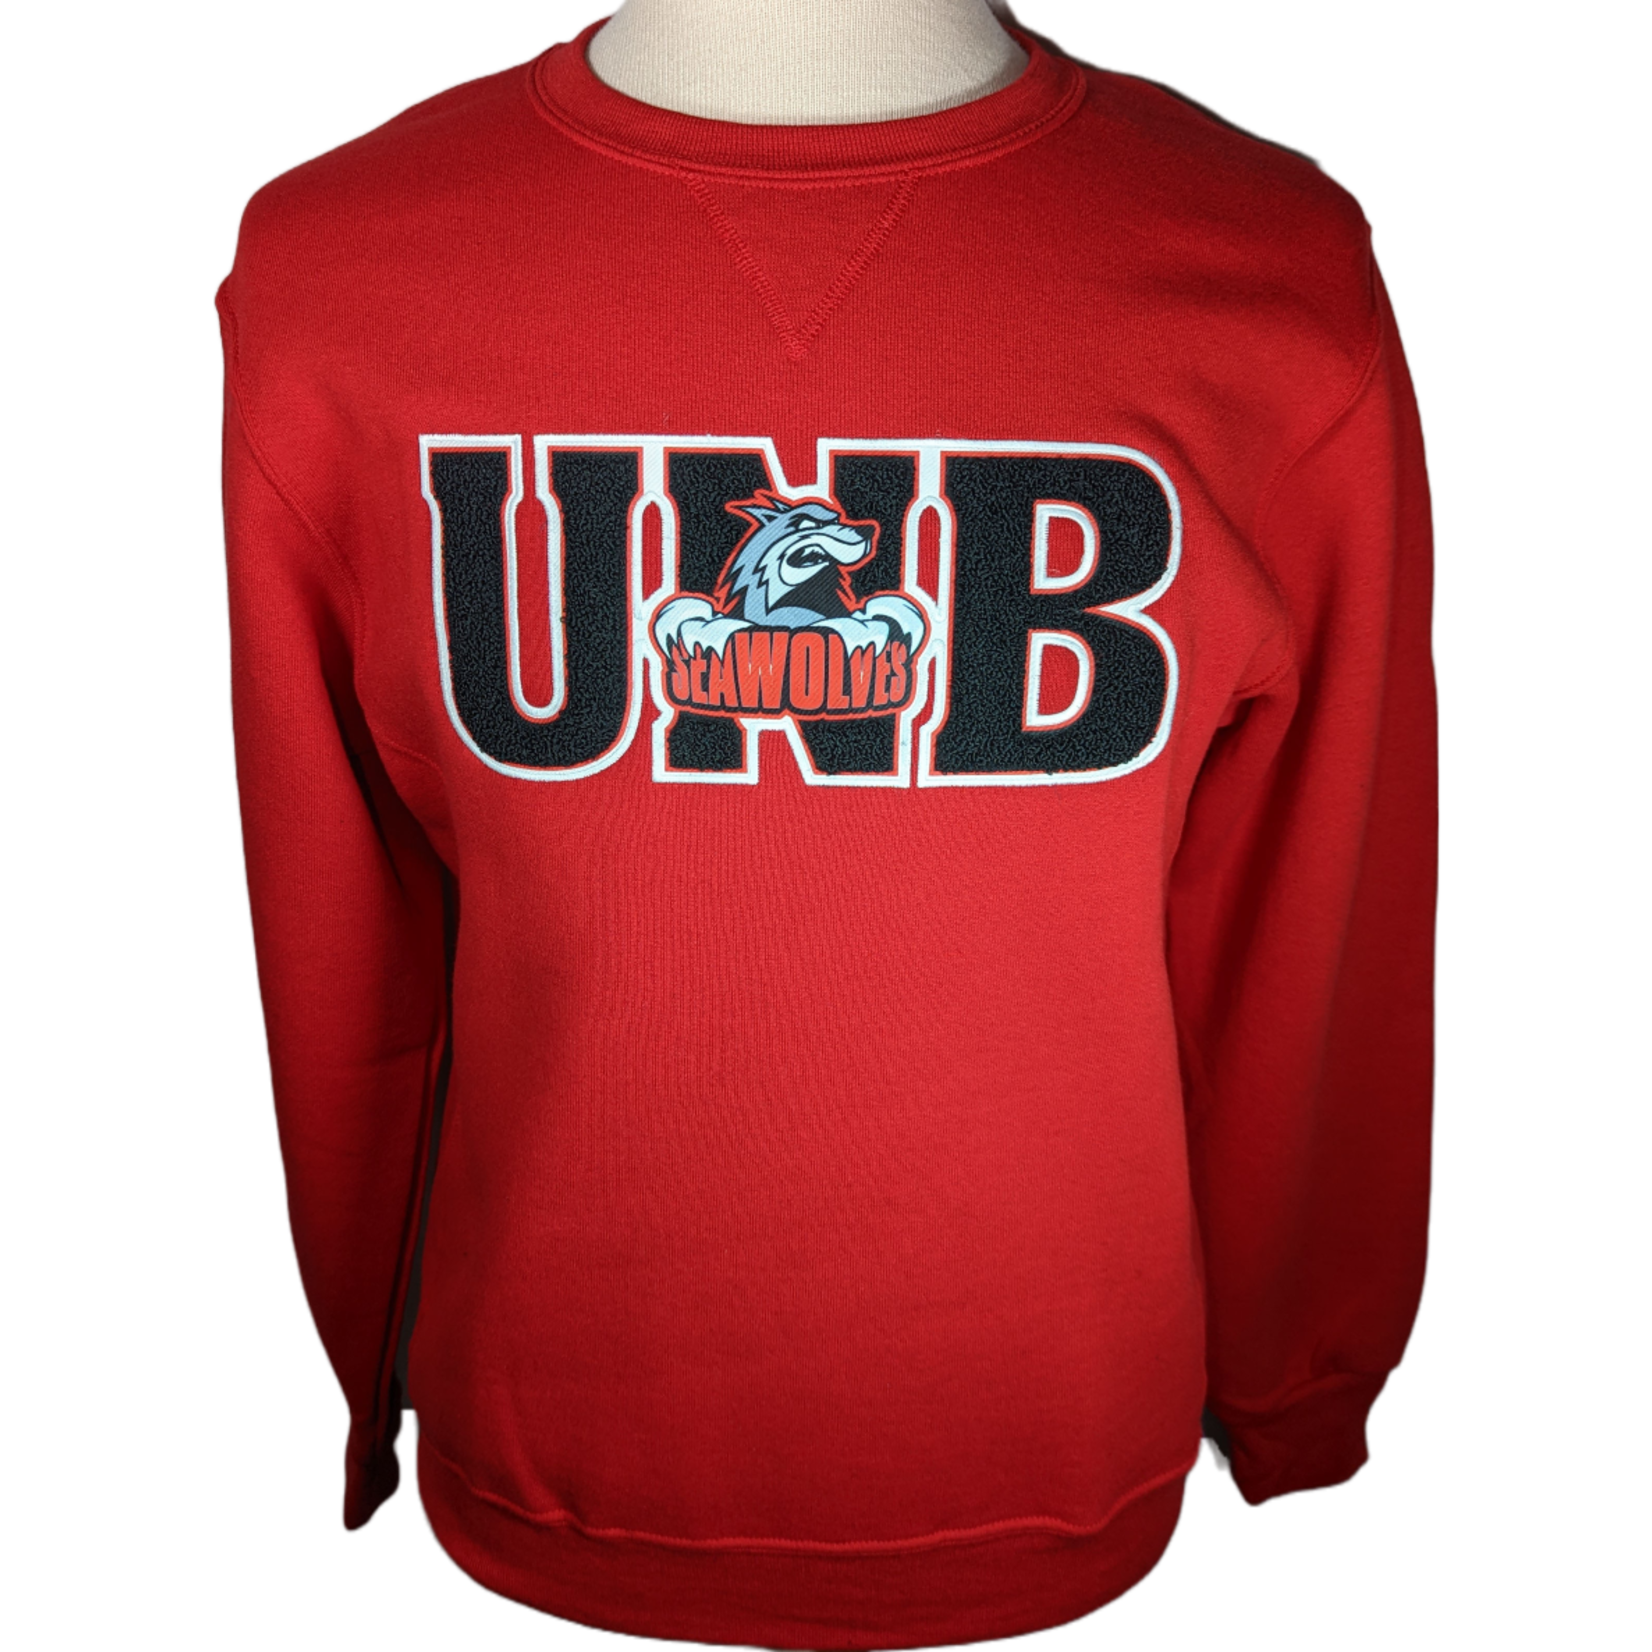 Russell Athletic Seawolves Chenille Dri-Power Sweater